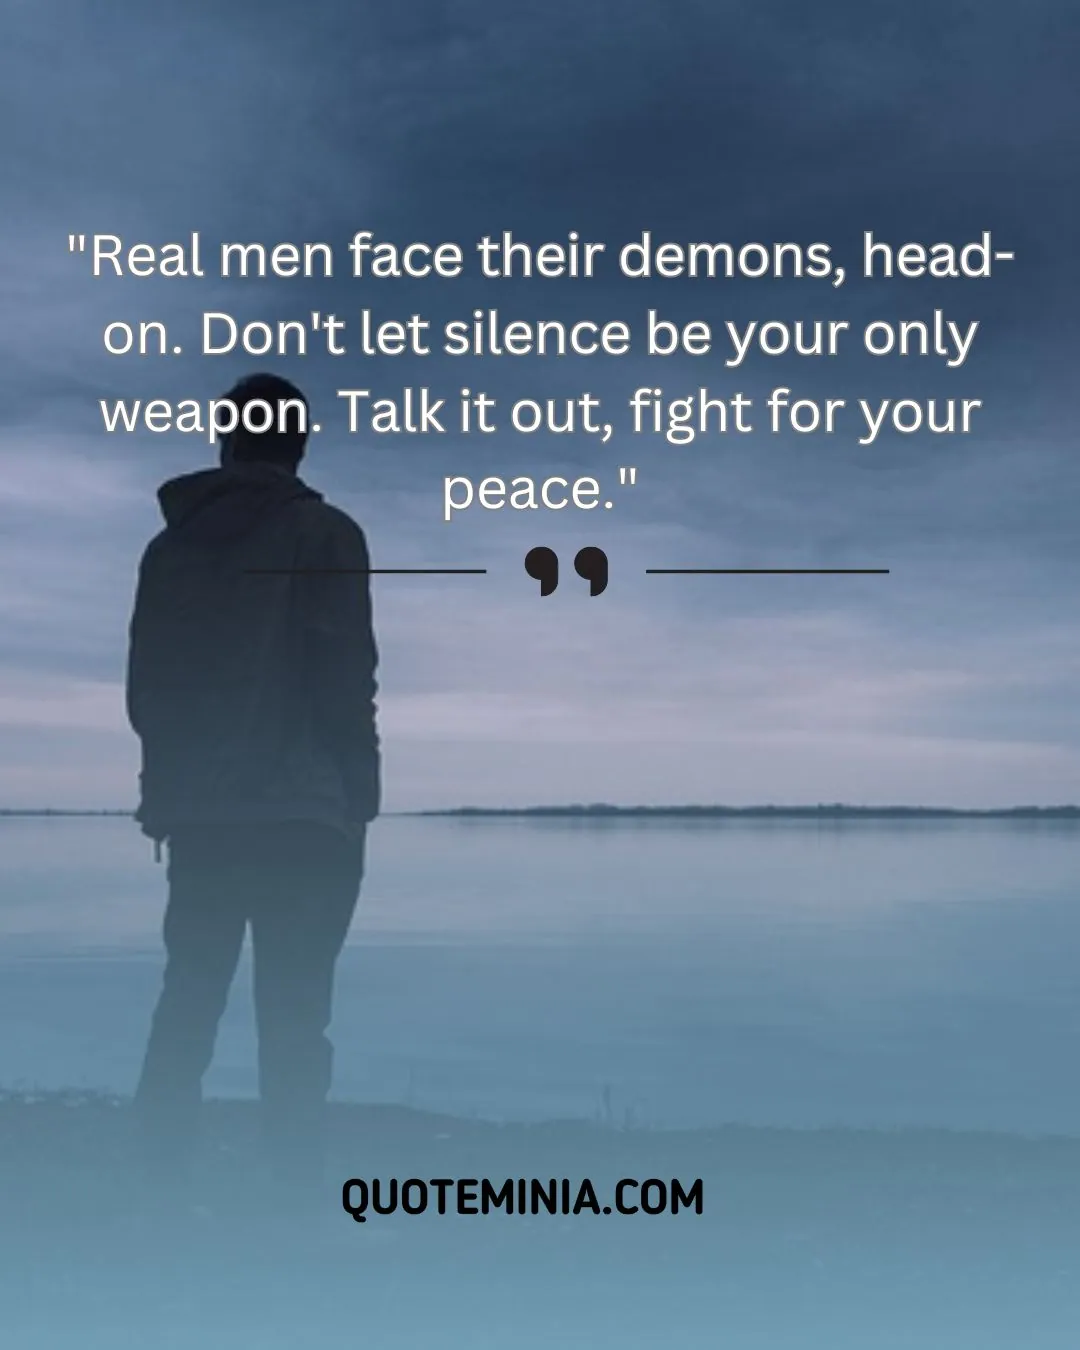 Men Suffer in Silence Quotes Image 4